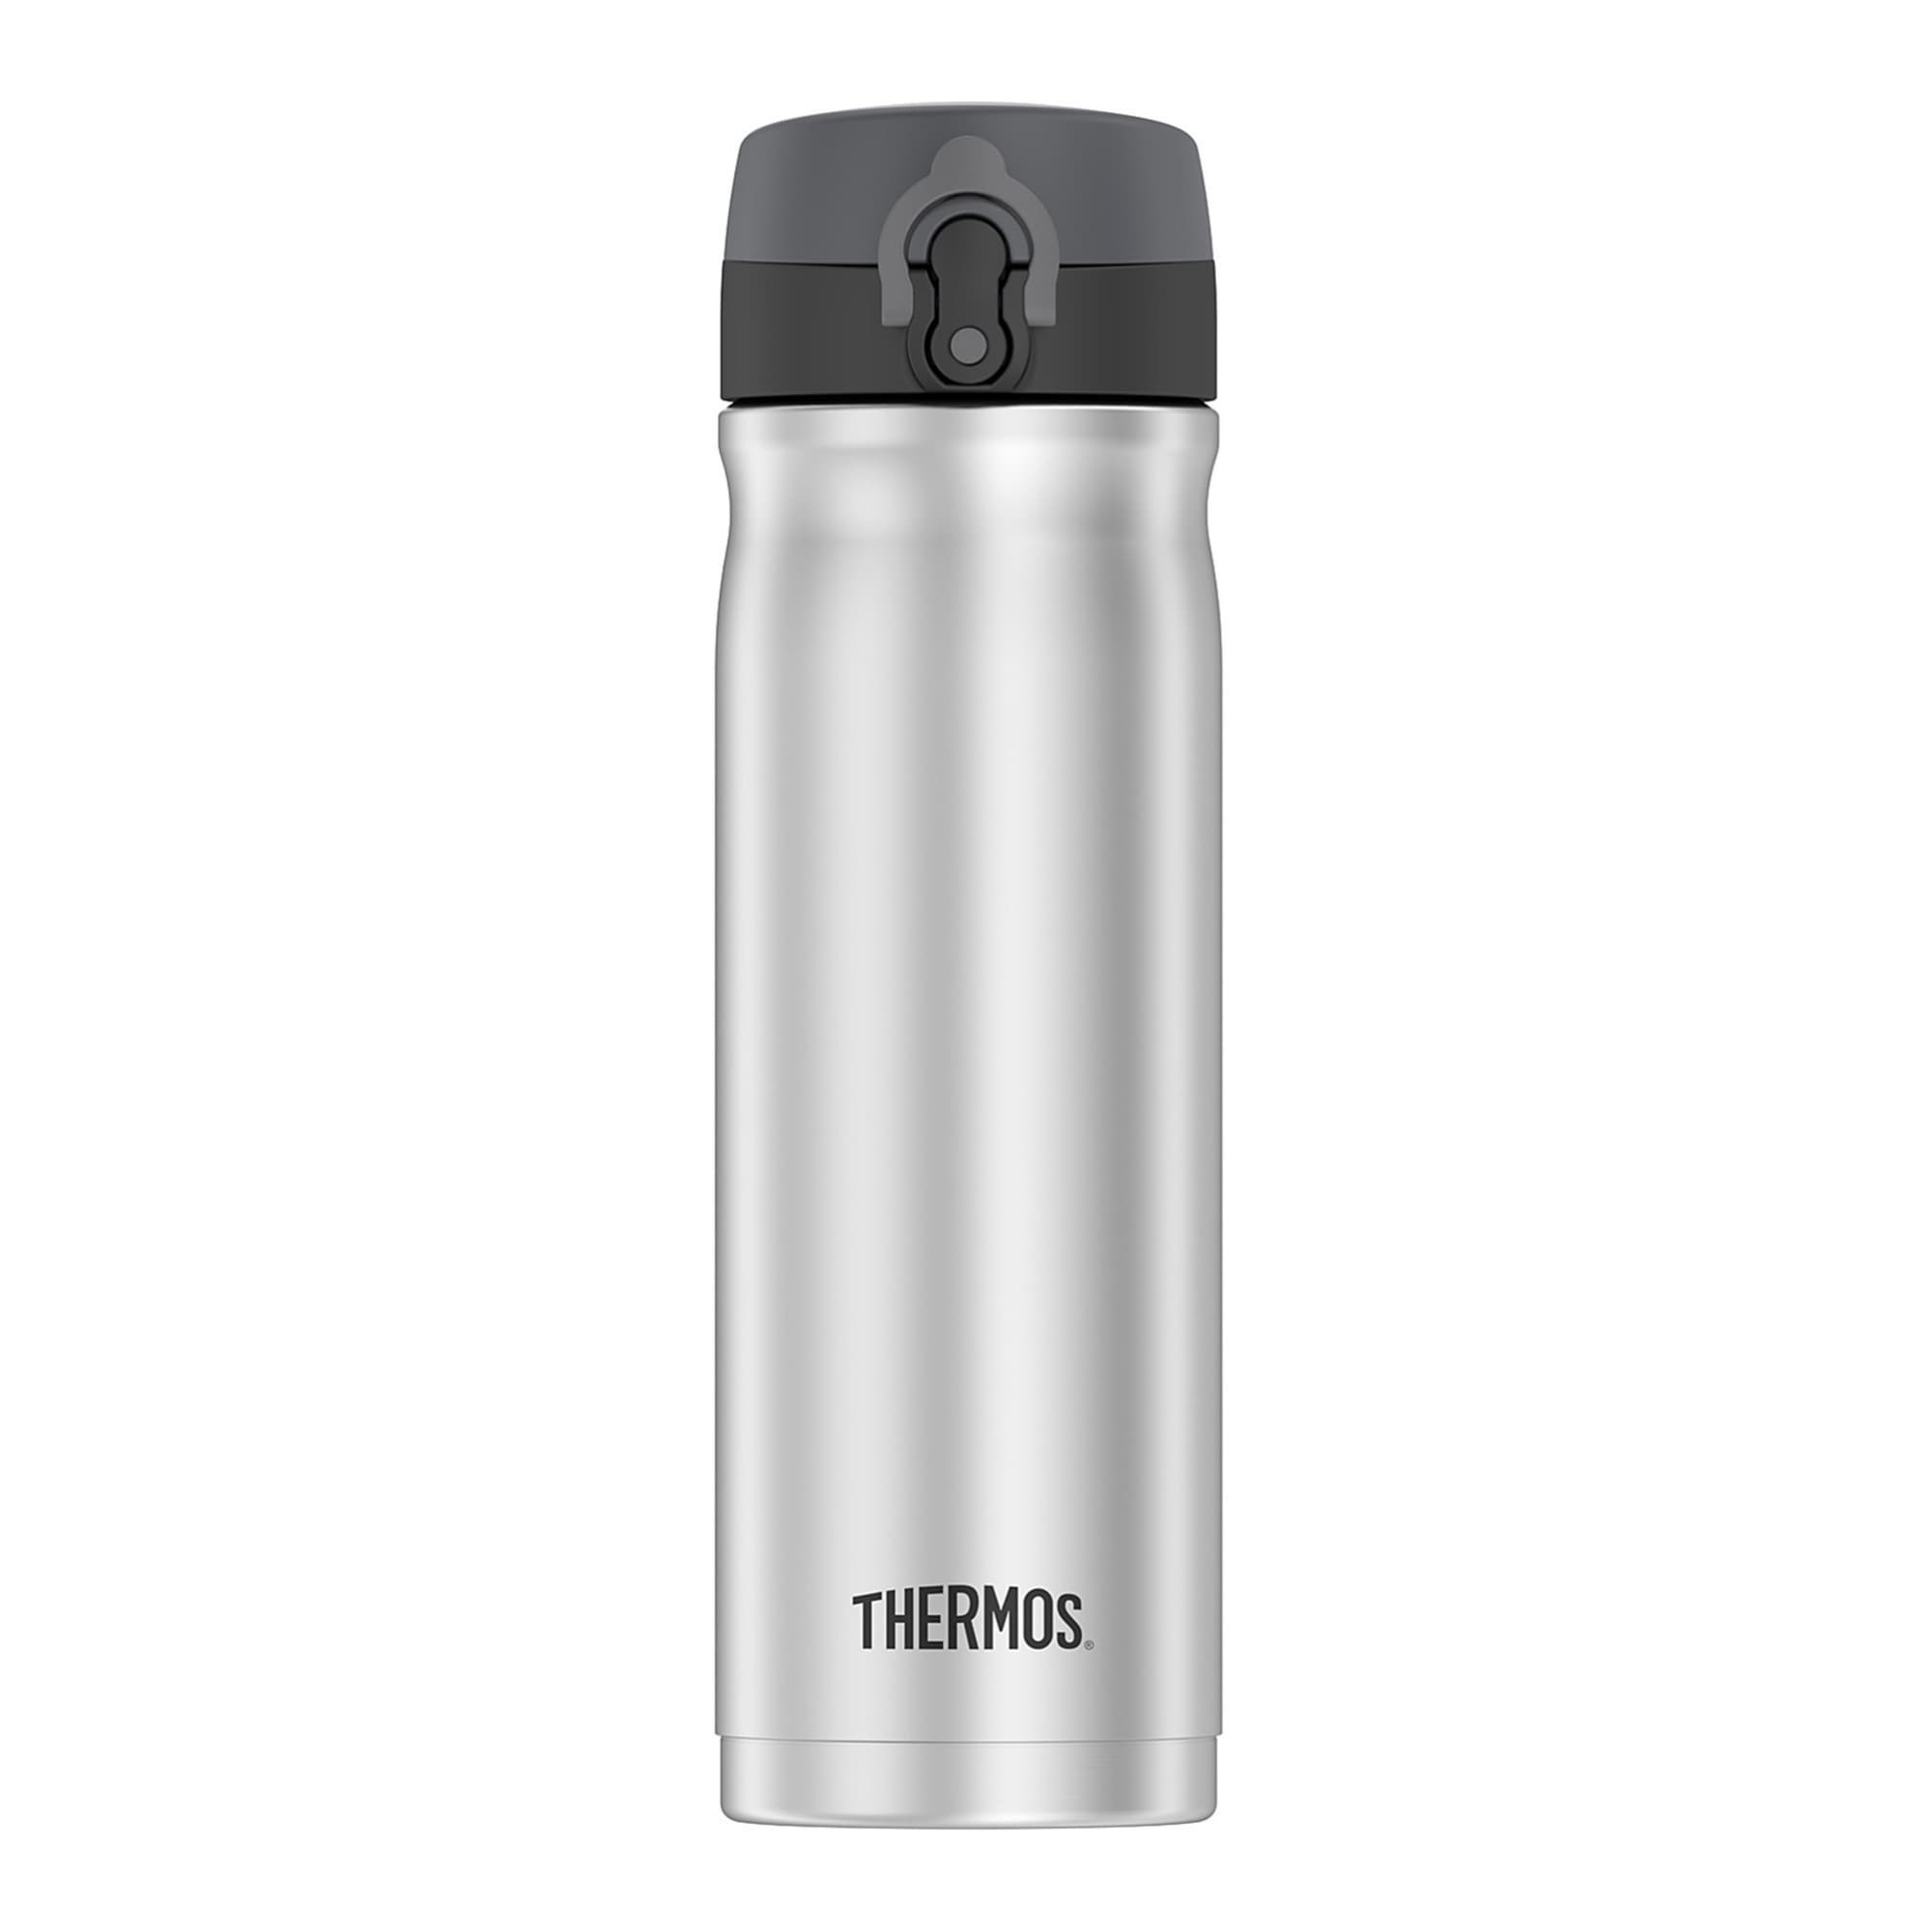 https://ak1.ostkcdn.com/images/products/is/images/direct/7a976f3ba3995753cb53a5530b44a84bdb911afd/Thermos-16-Ounce-Stainless-Steel-Direct-Drink-Double-Wall-Sport-Bottle.jpg